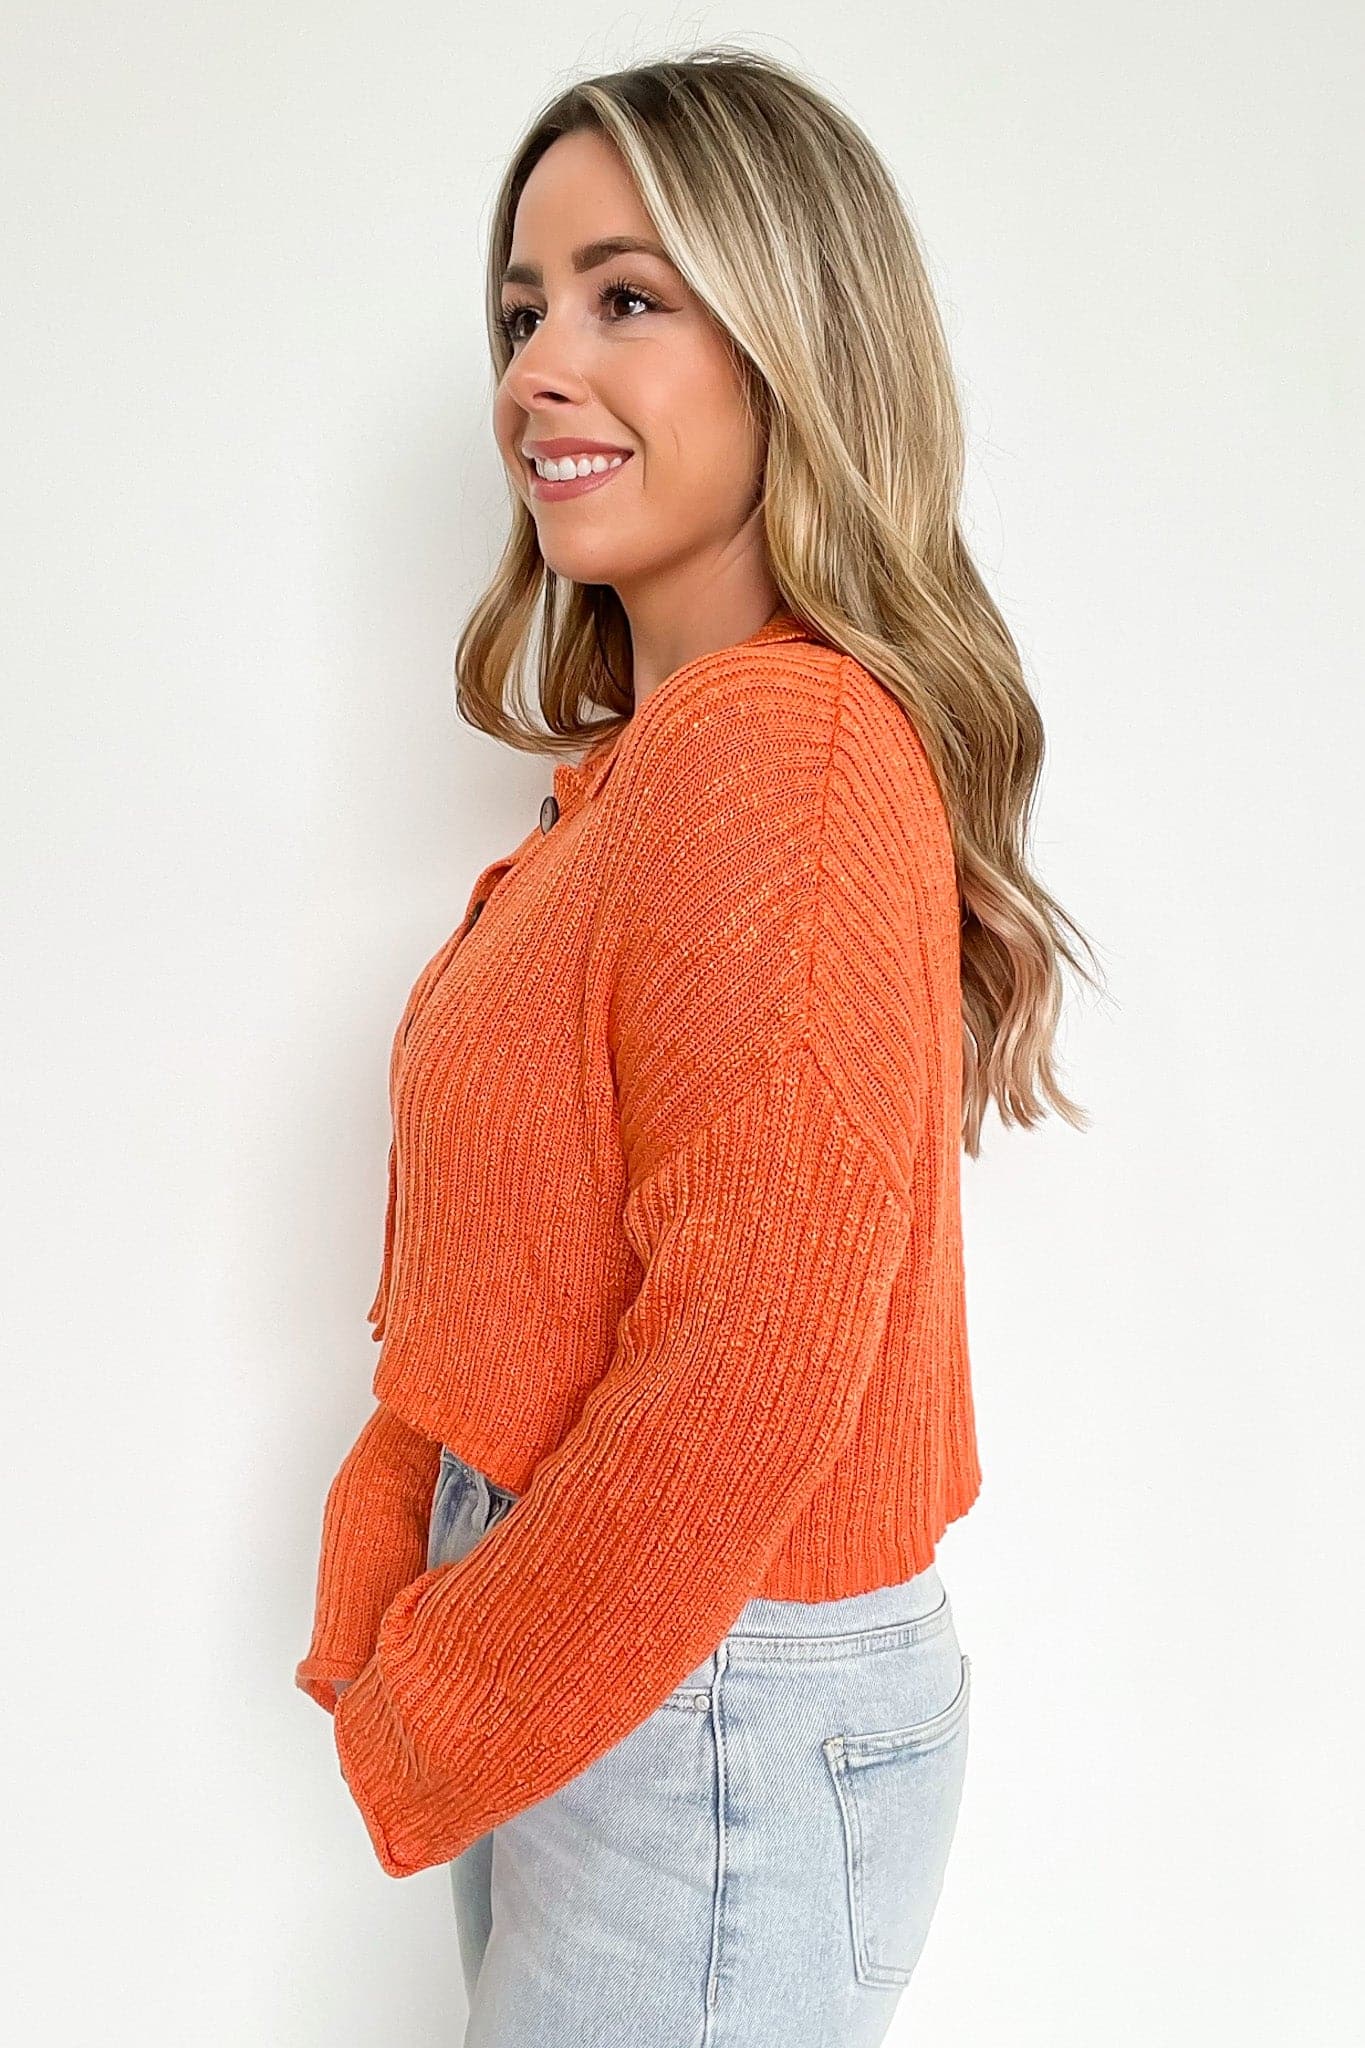  Truro Slouchy Cropped Button Down Cardigan - FINAL SALE - Madison and Mallory